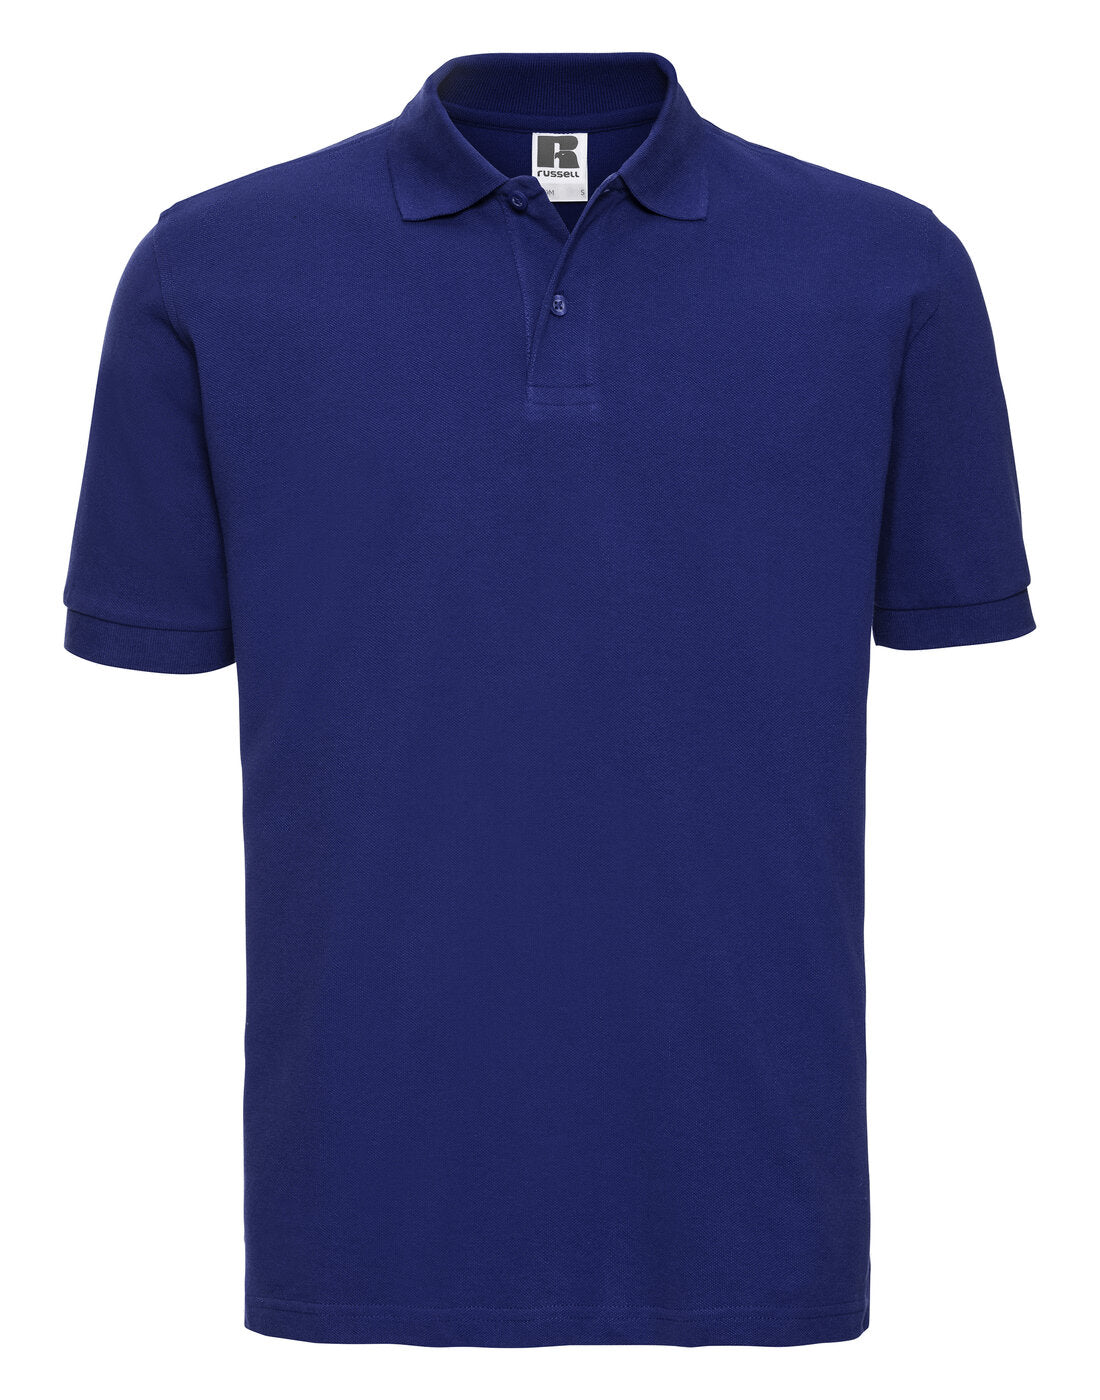 Russell Classic Cotton Polo - 569M Bright Royal